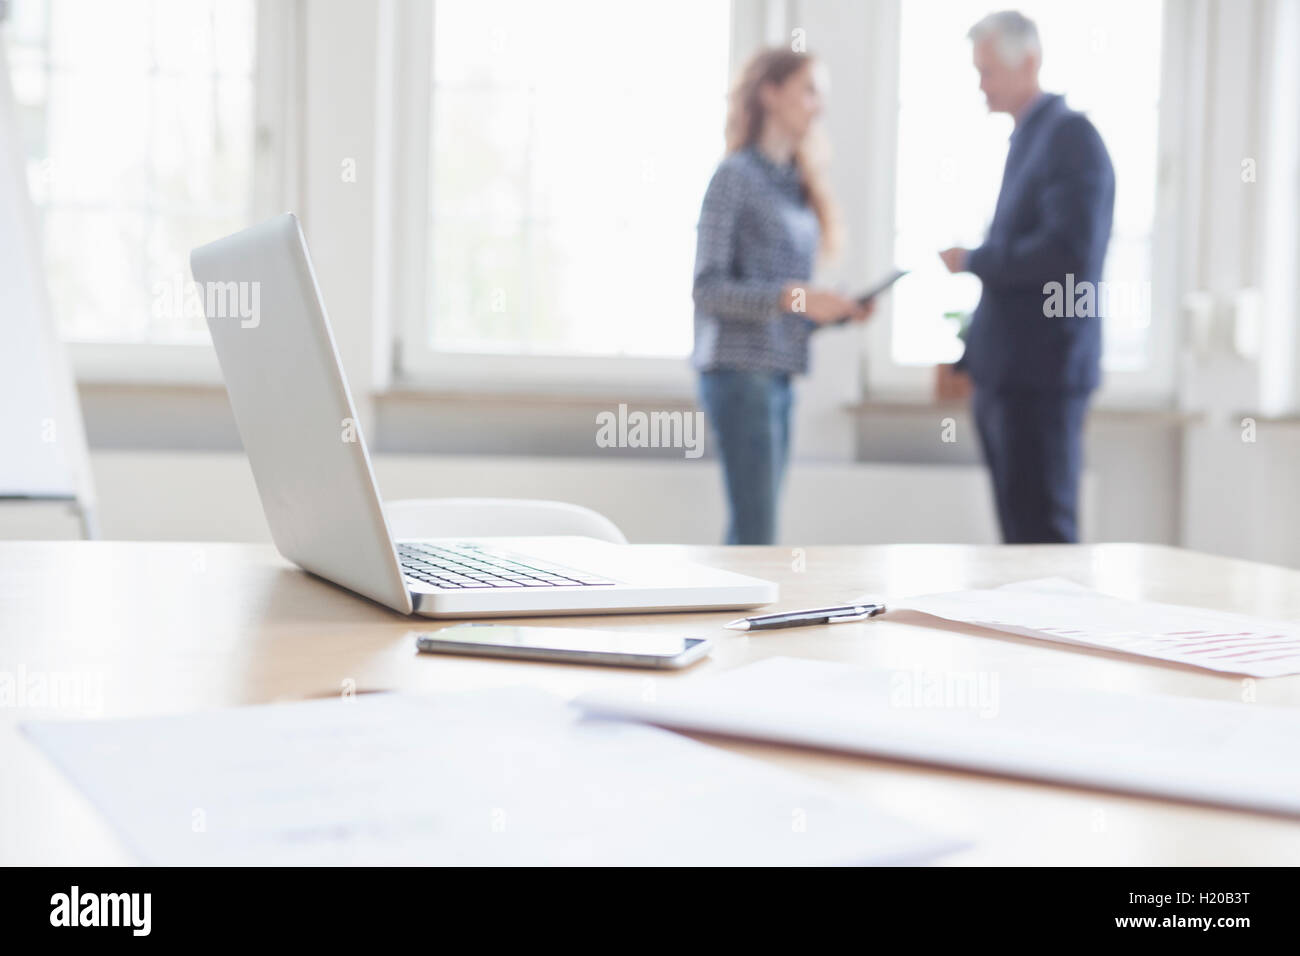 Laptop and documents on desk with businesspeople in background Stock Photo